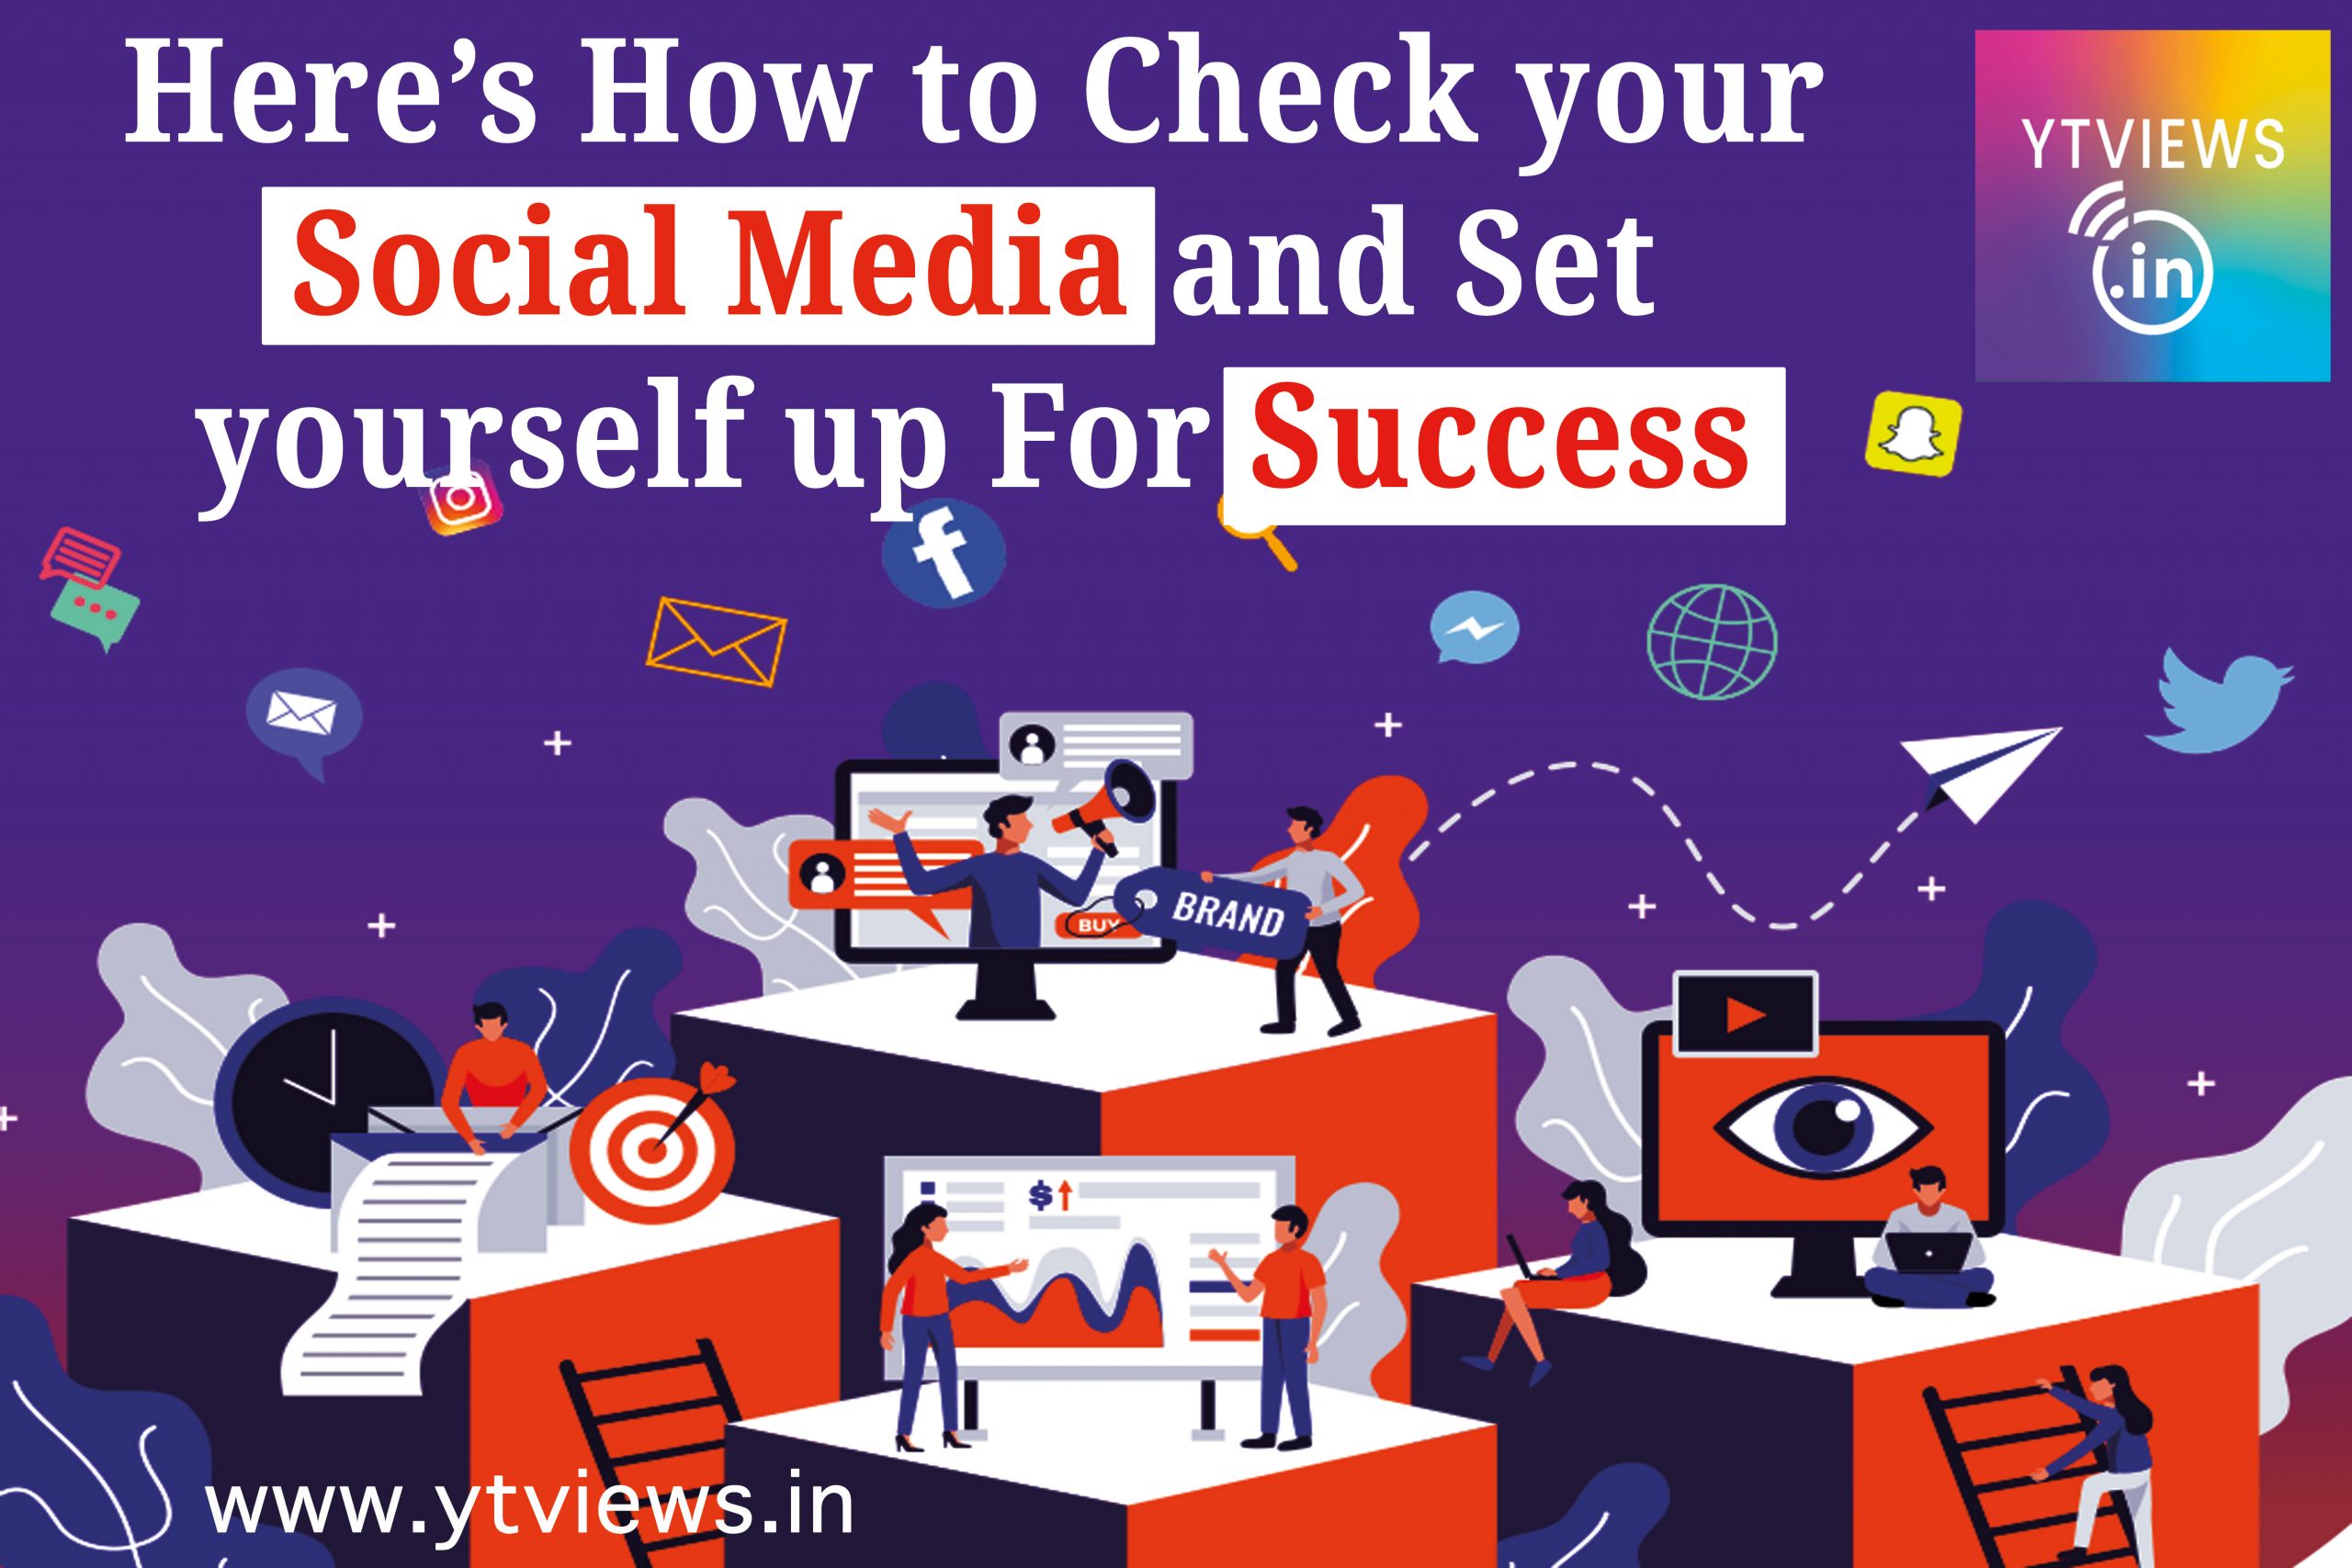 Here’s how to Check your Social Media and Set yourself up for Success.